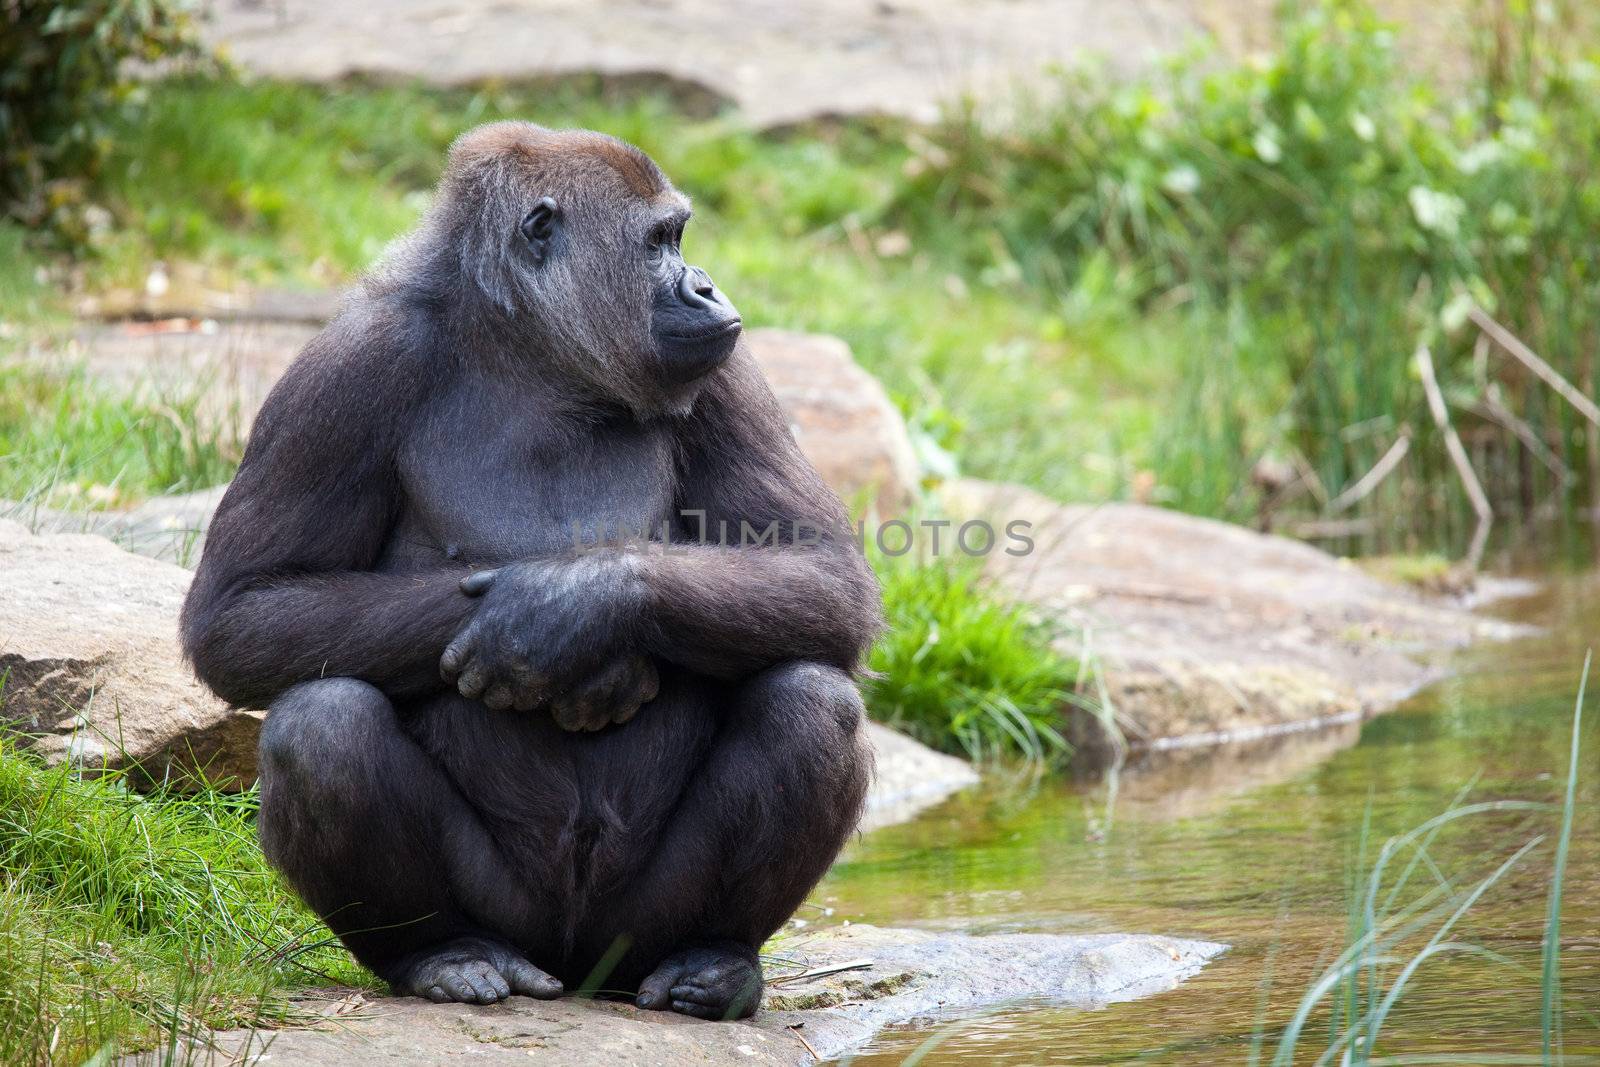 Female gorilla sitting and patiently waiting and observing